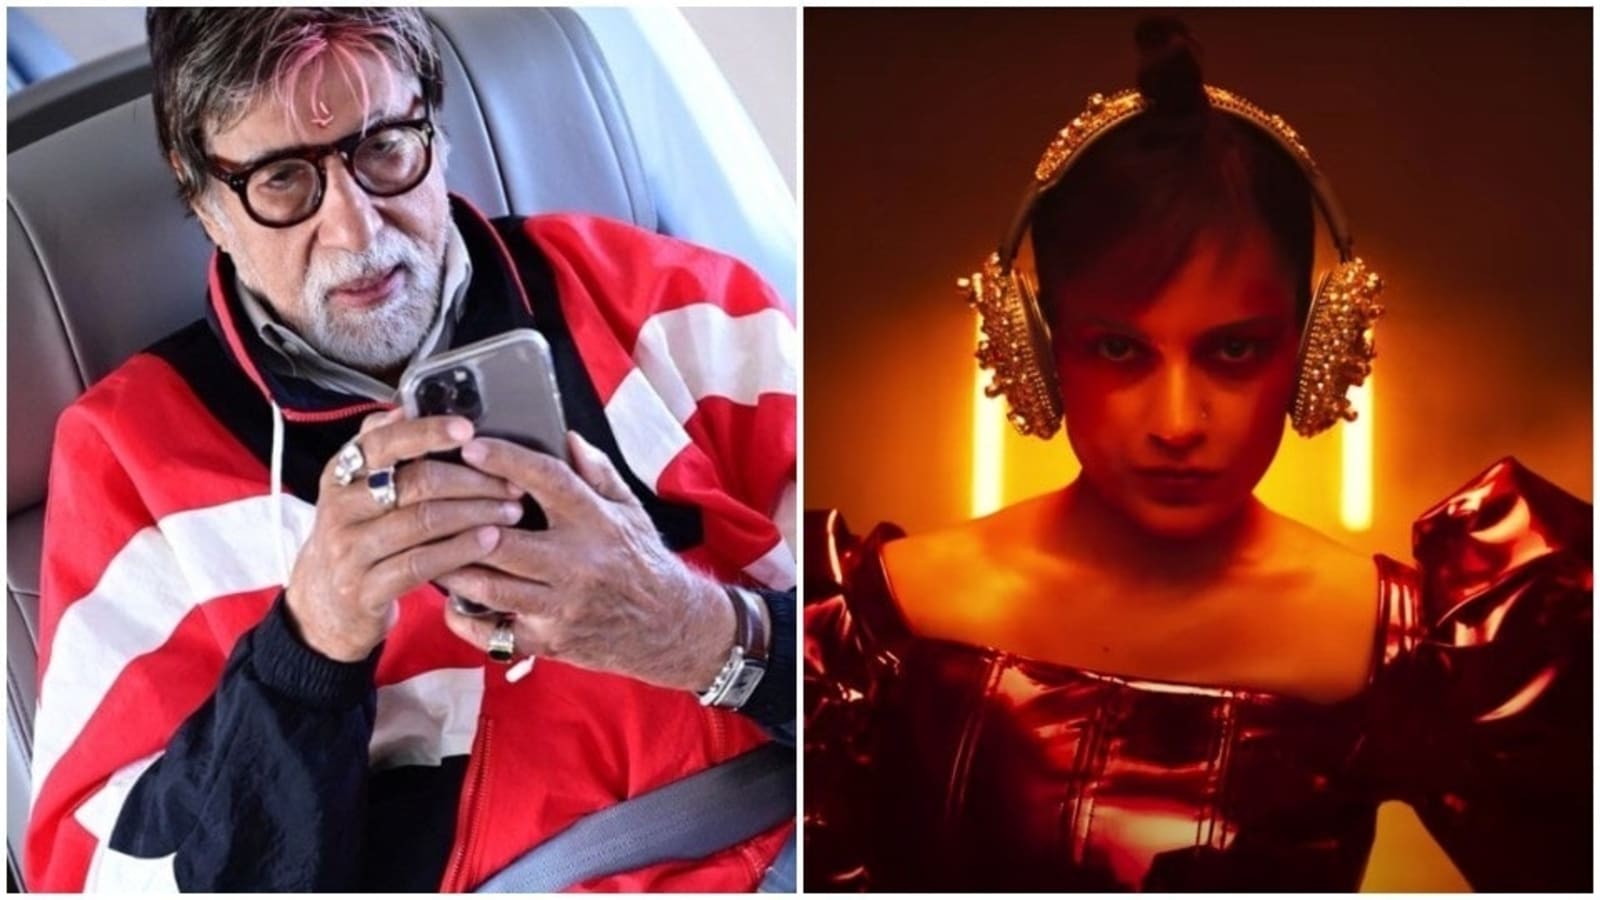 Kangana Ranaut reacts to Amitabh Bachchan tweeting and deleting teaser of Dhaakad song: ‘They have their personal stuff’